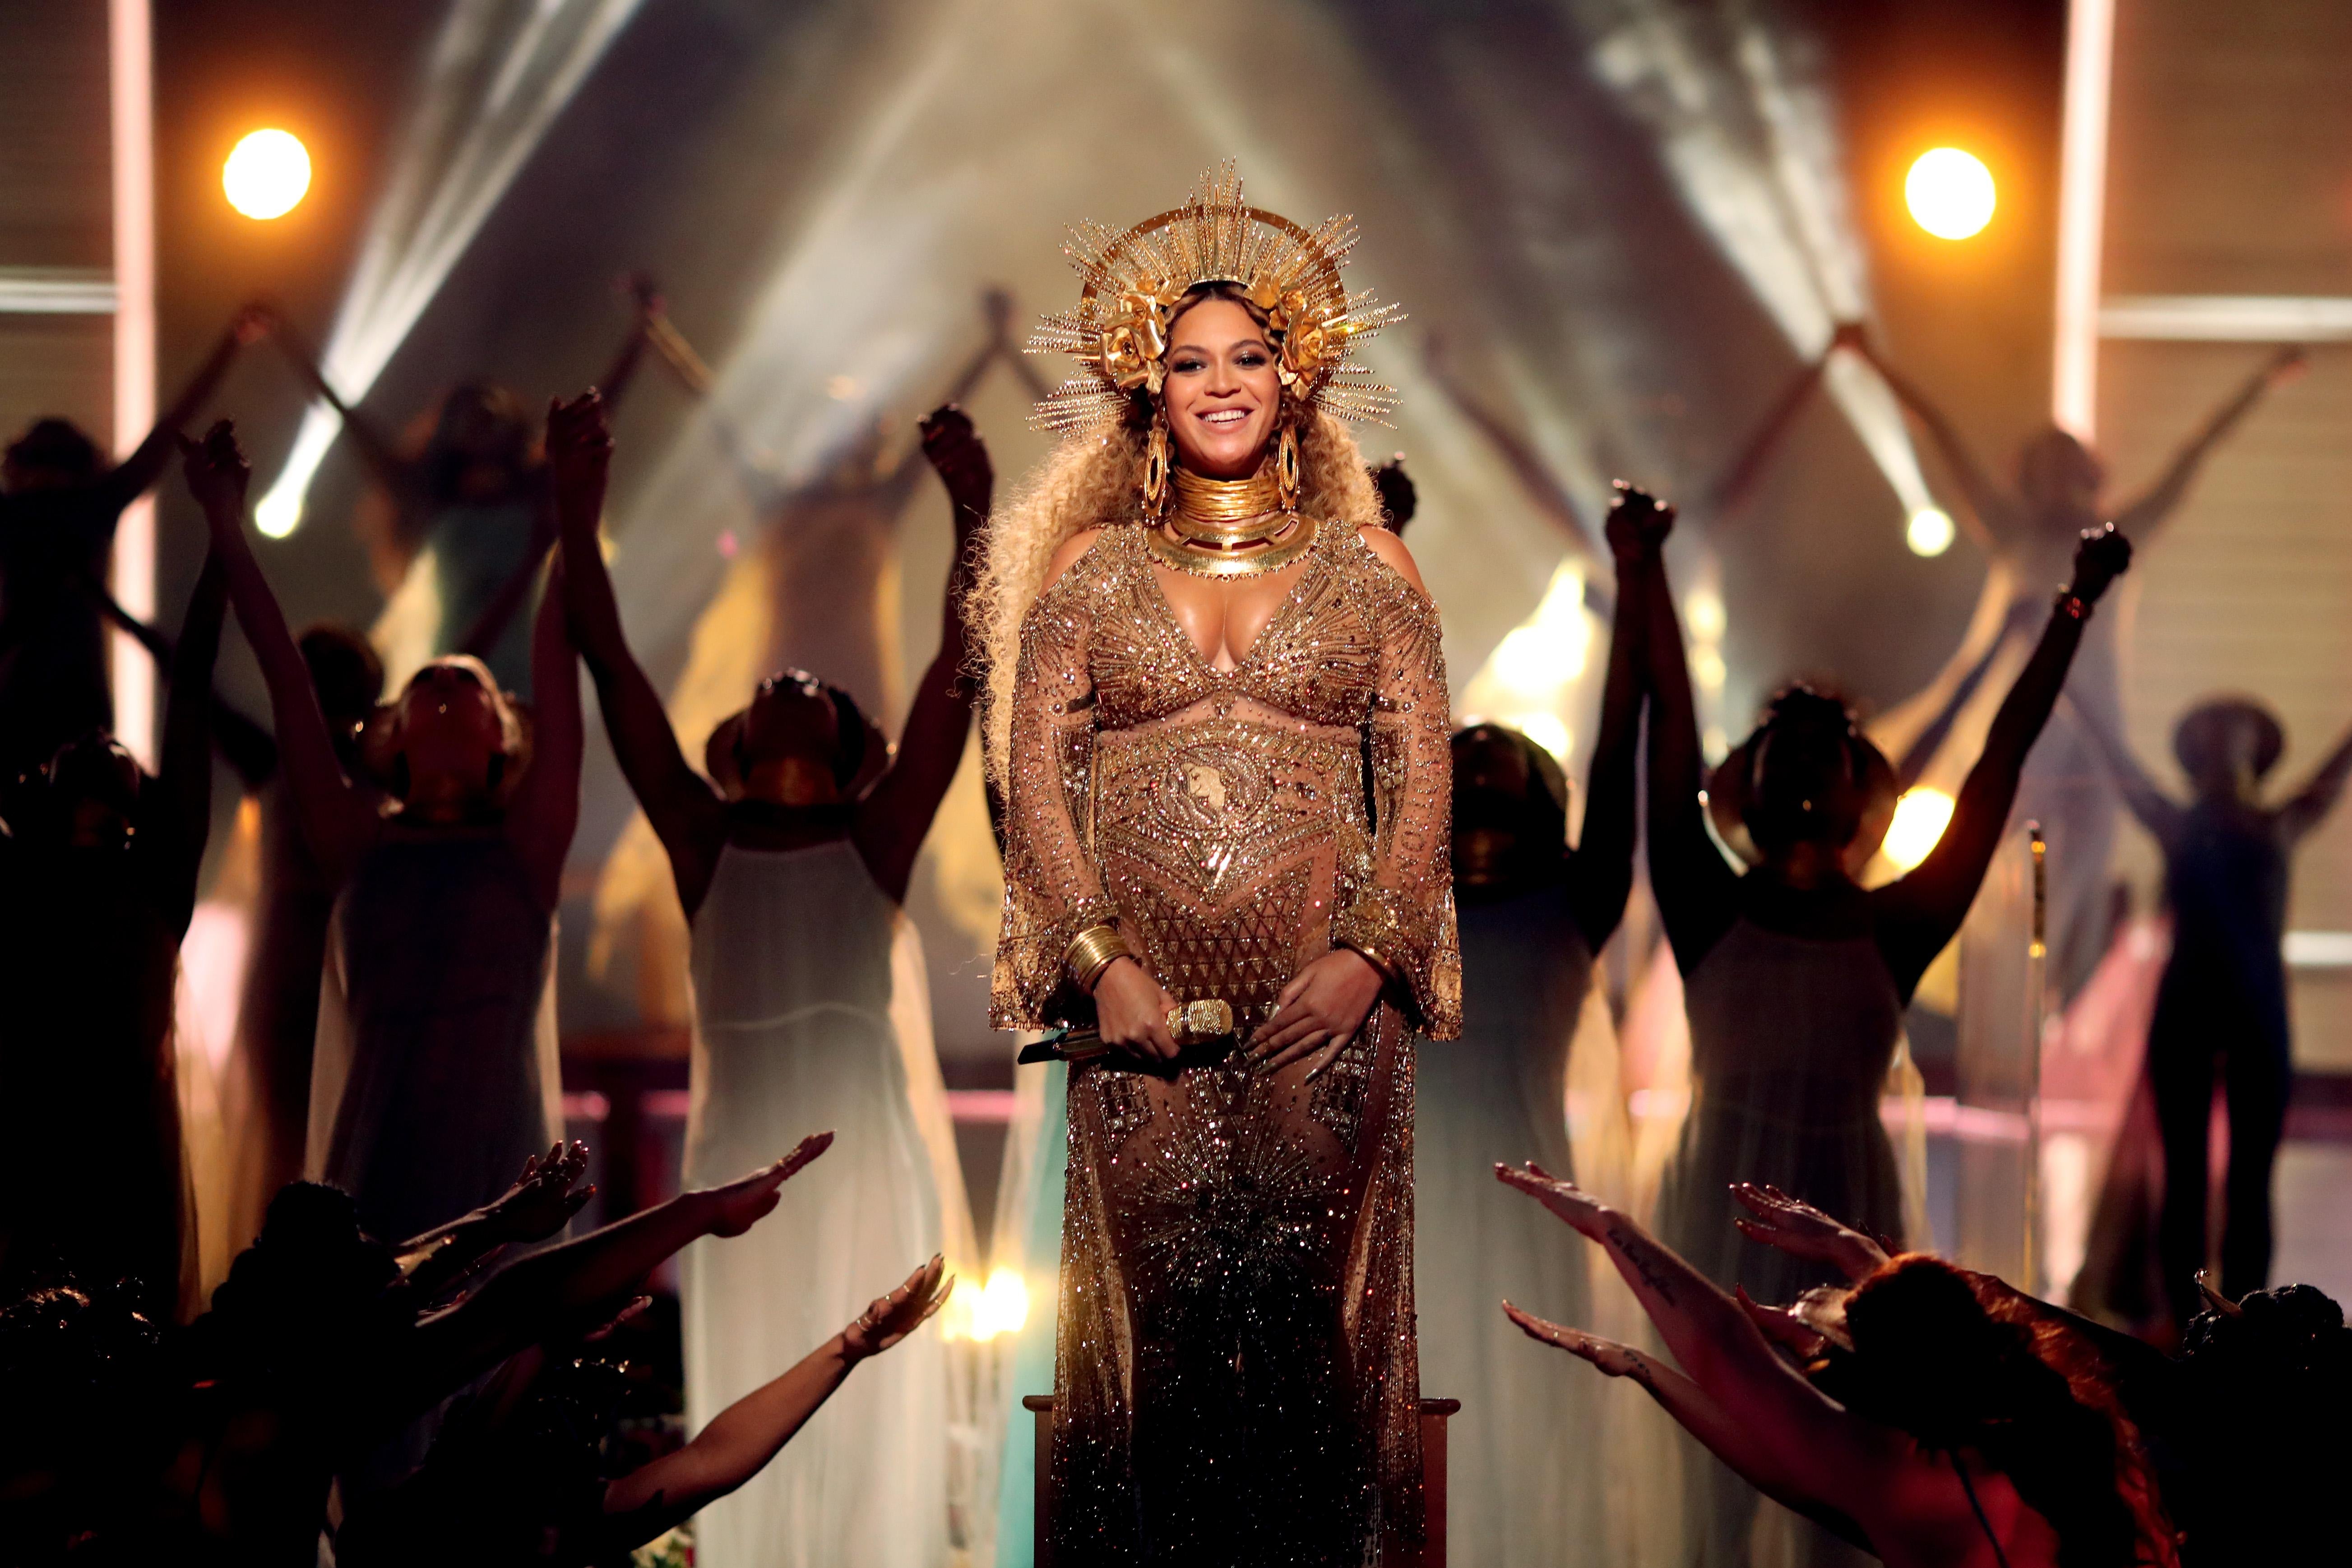 Beyonce standing on stage smiling in a long sleeve gold dress and a halo crown.